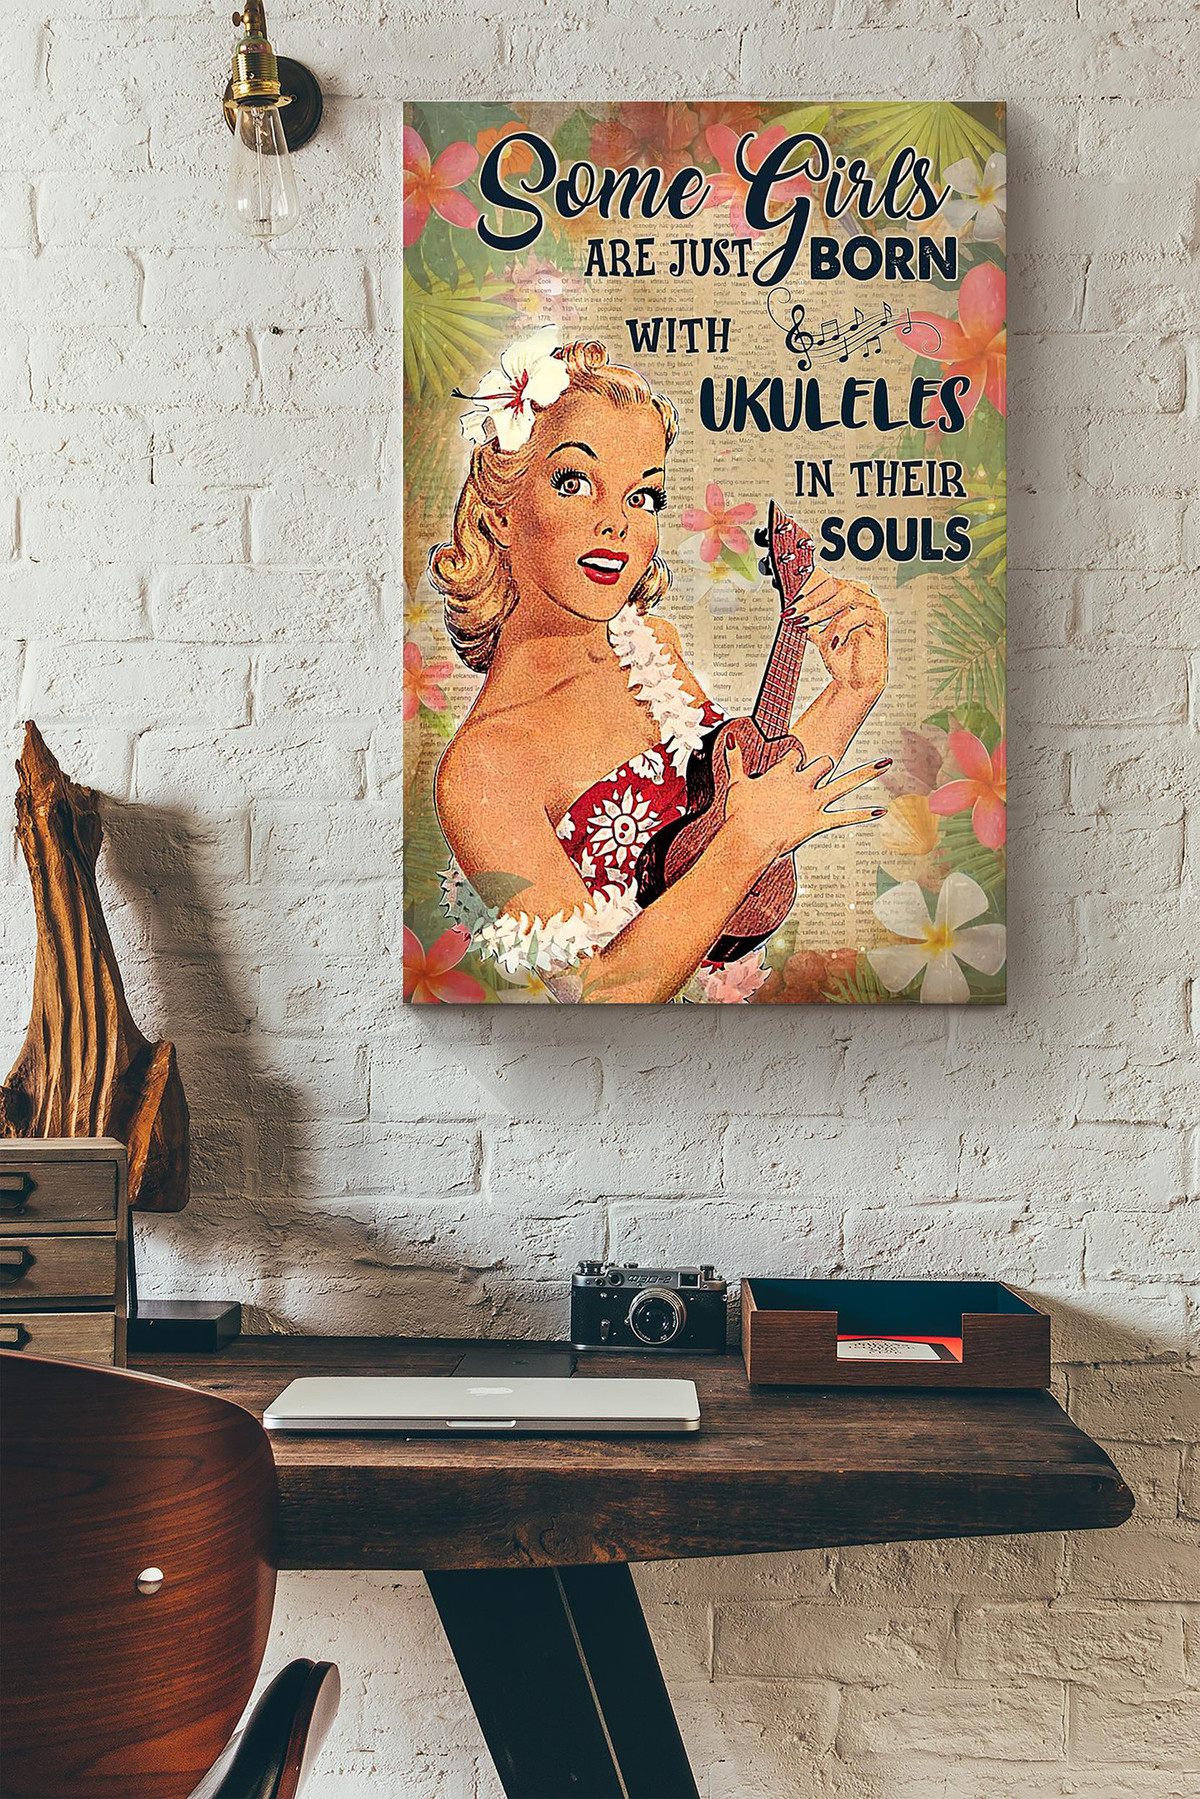 Some Girls Are Just Born With Ukuleles In Their Souls Canvas Painting Ideas, Canvas Hanging Prints, Gift Idea Framed Prints, Canvas Paintings Wrapped Canvas 8x10